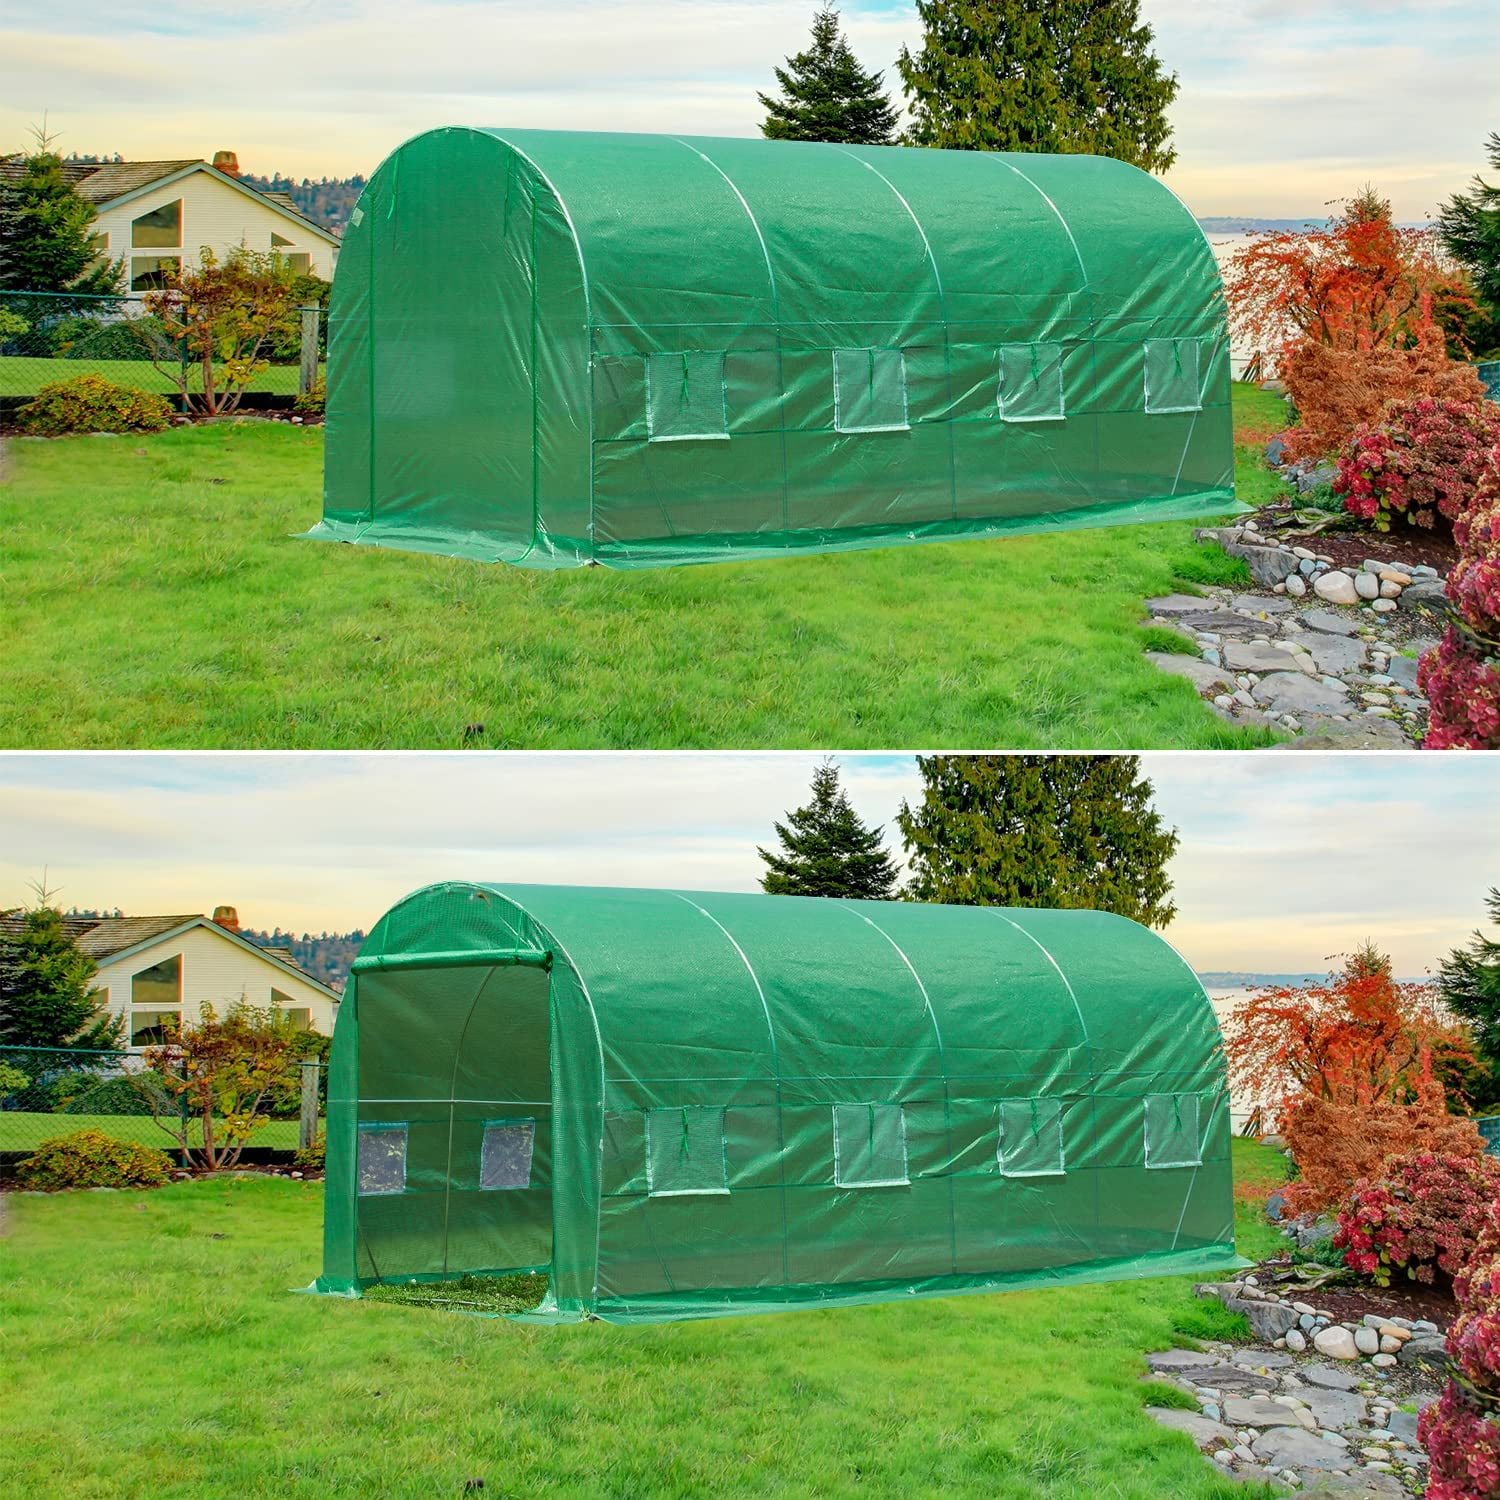 MELLCOM 20' x 10' x 7' Greenhouse Gardening Large Plant Hot House Portable Walking in Tunnel Tent Green 